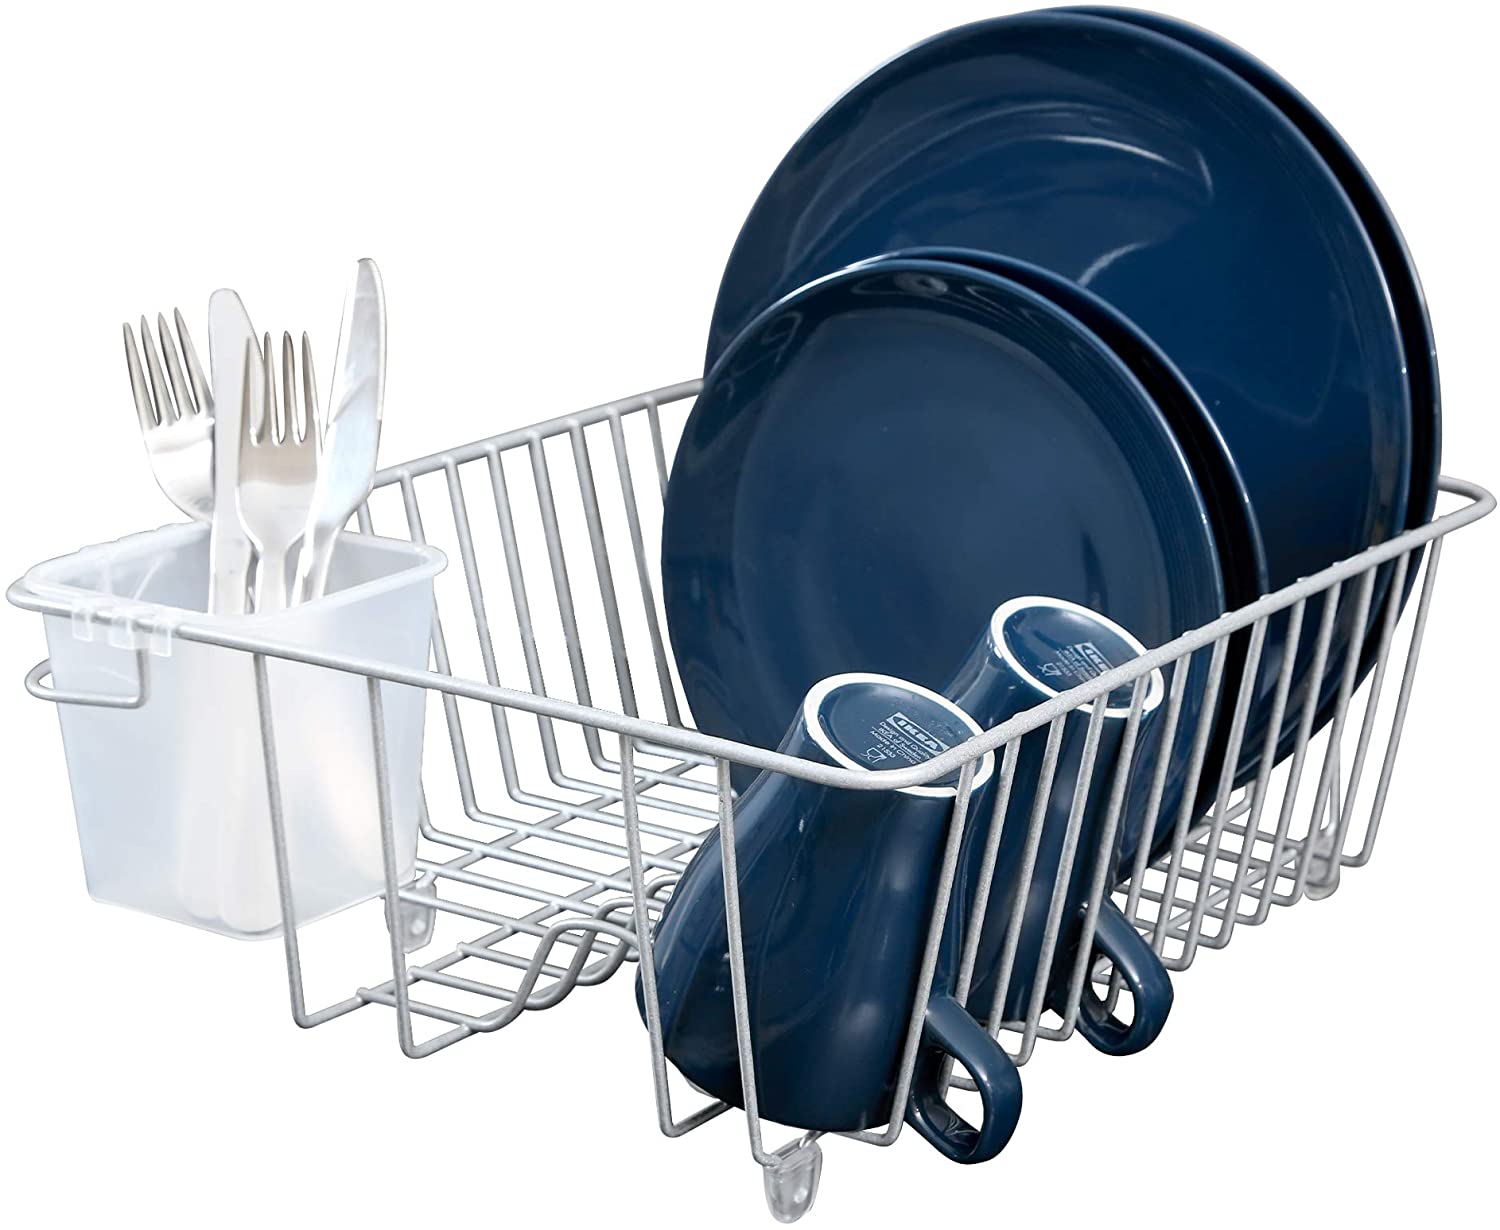 https://cdn.shopify.com/s/files/1/2393/7799/products/dish-drainer-rack-for-in-sink-or-counter-drying-small-smart-design-kitchen-8116108a12-incrementing-number-888909.jpg?v=1679343219